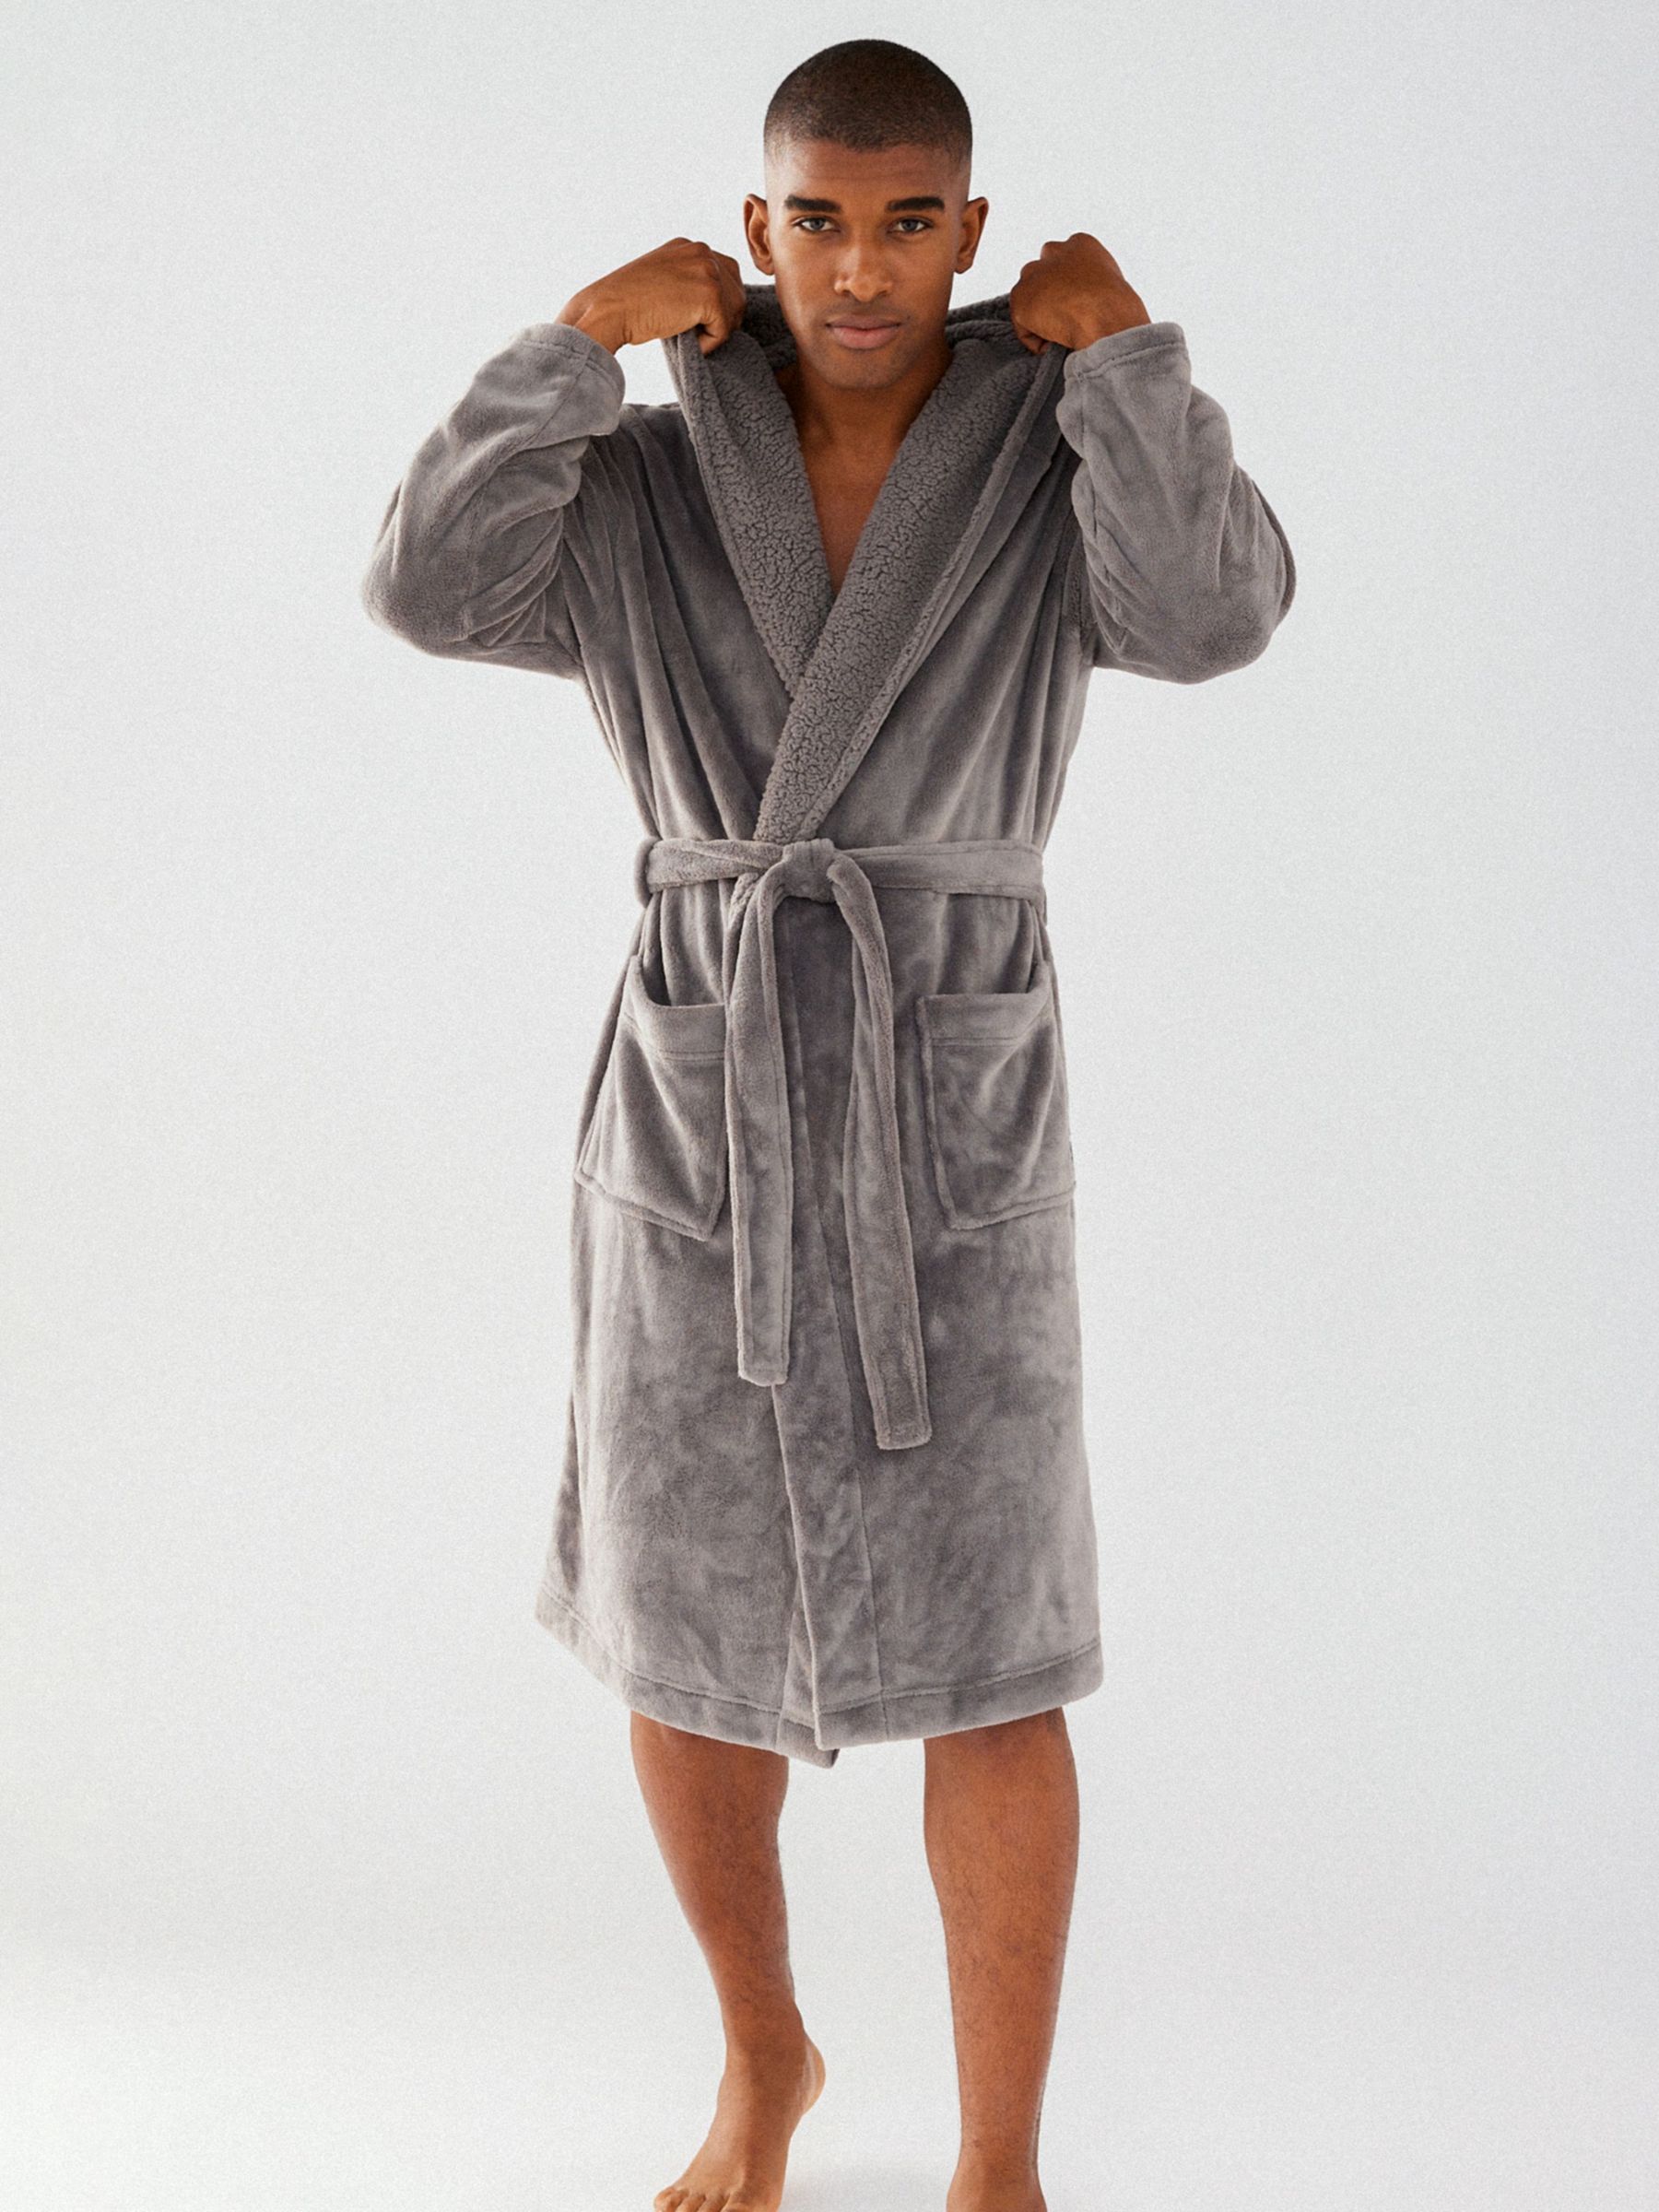 Chelsea Peers Fluffy Hooded Dressing Gown, Grey at John Lewis & Partners